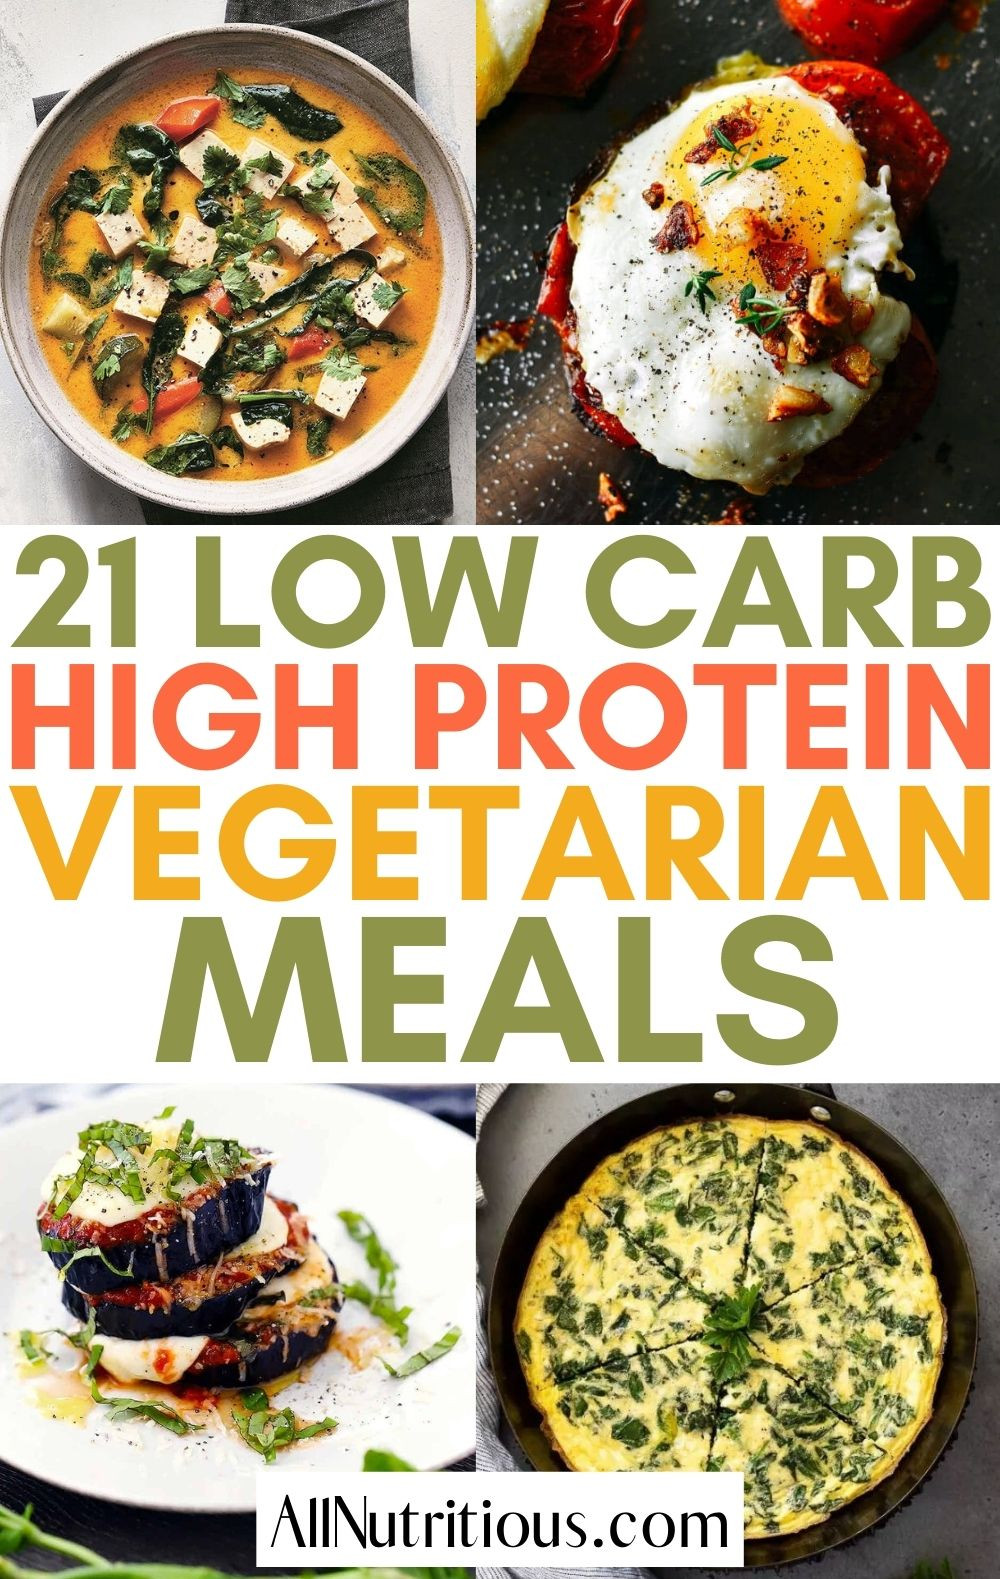 Low Carb High Protein Vegetarian Best Of 21 High Protein Low Carb Ve Arian Meals All Nutritious